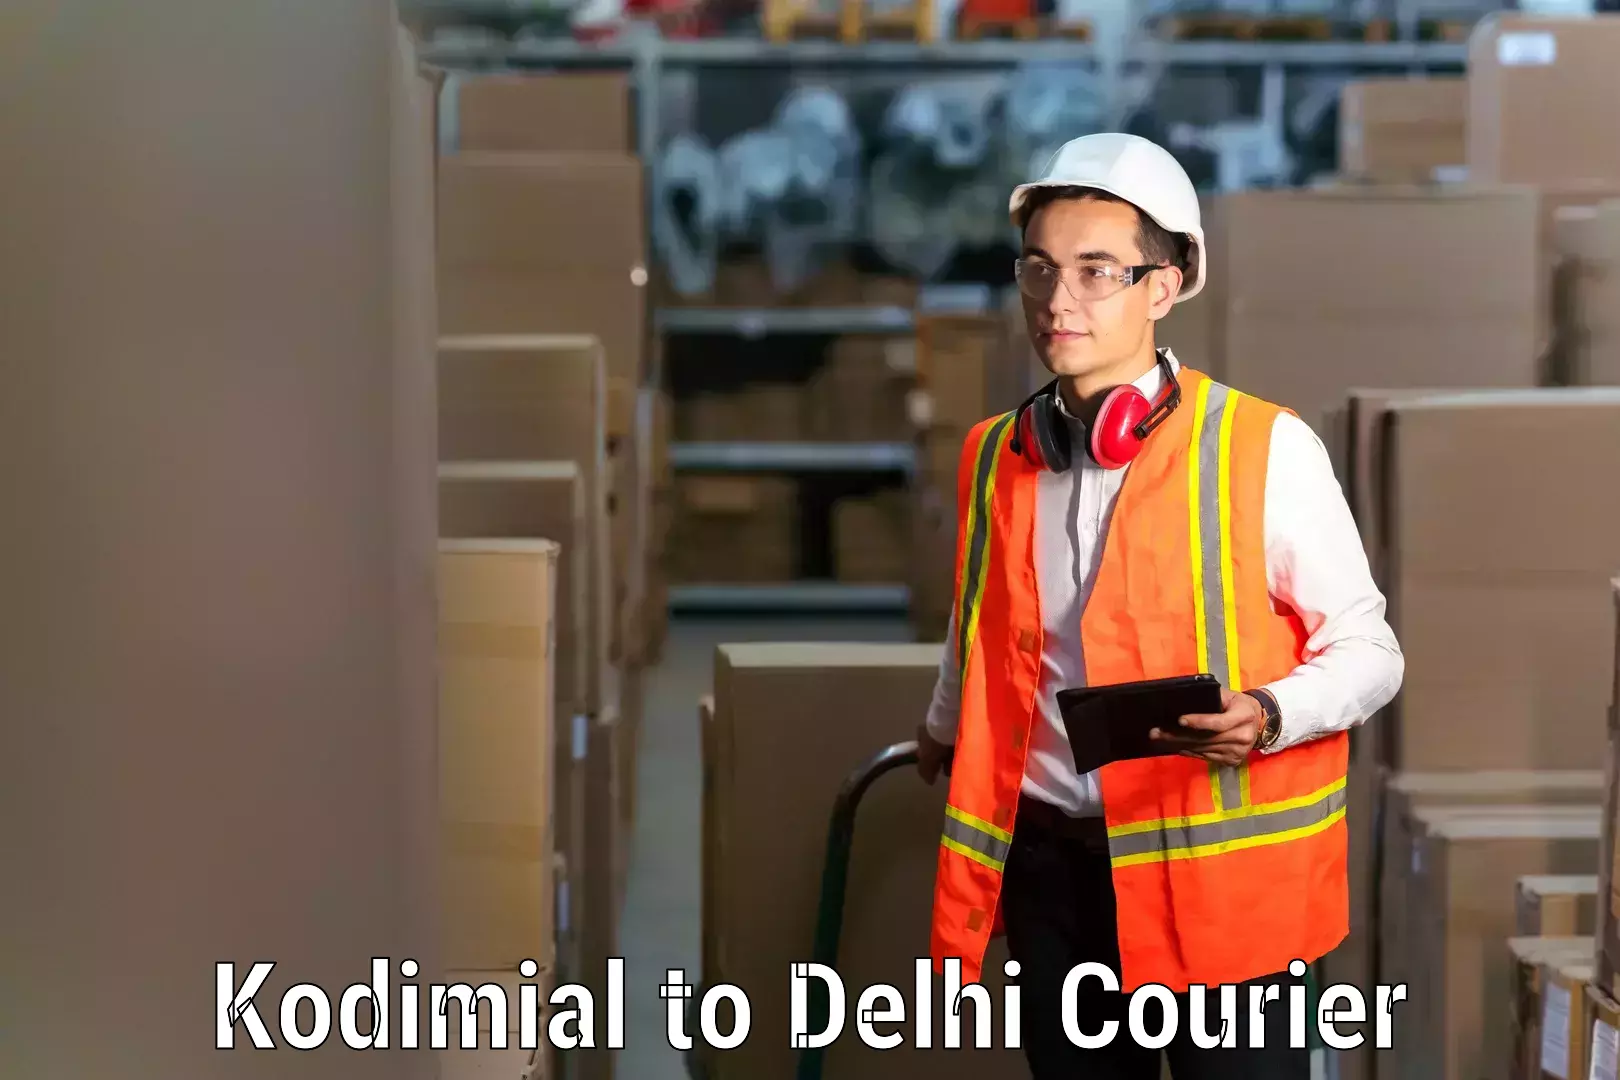 Furniture moving experts Kodimial to Lodhi Road